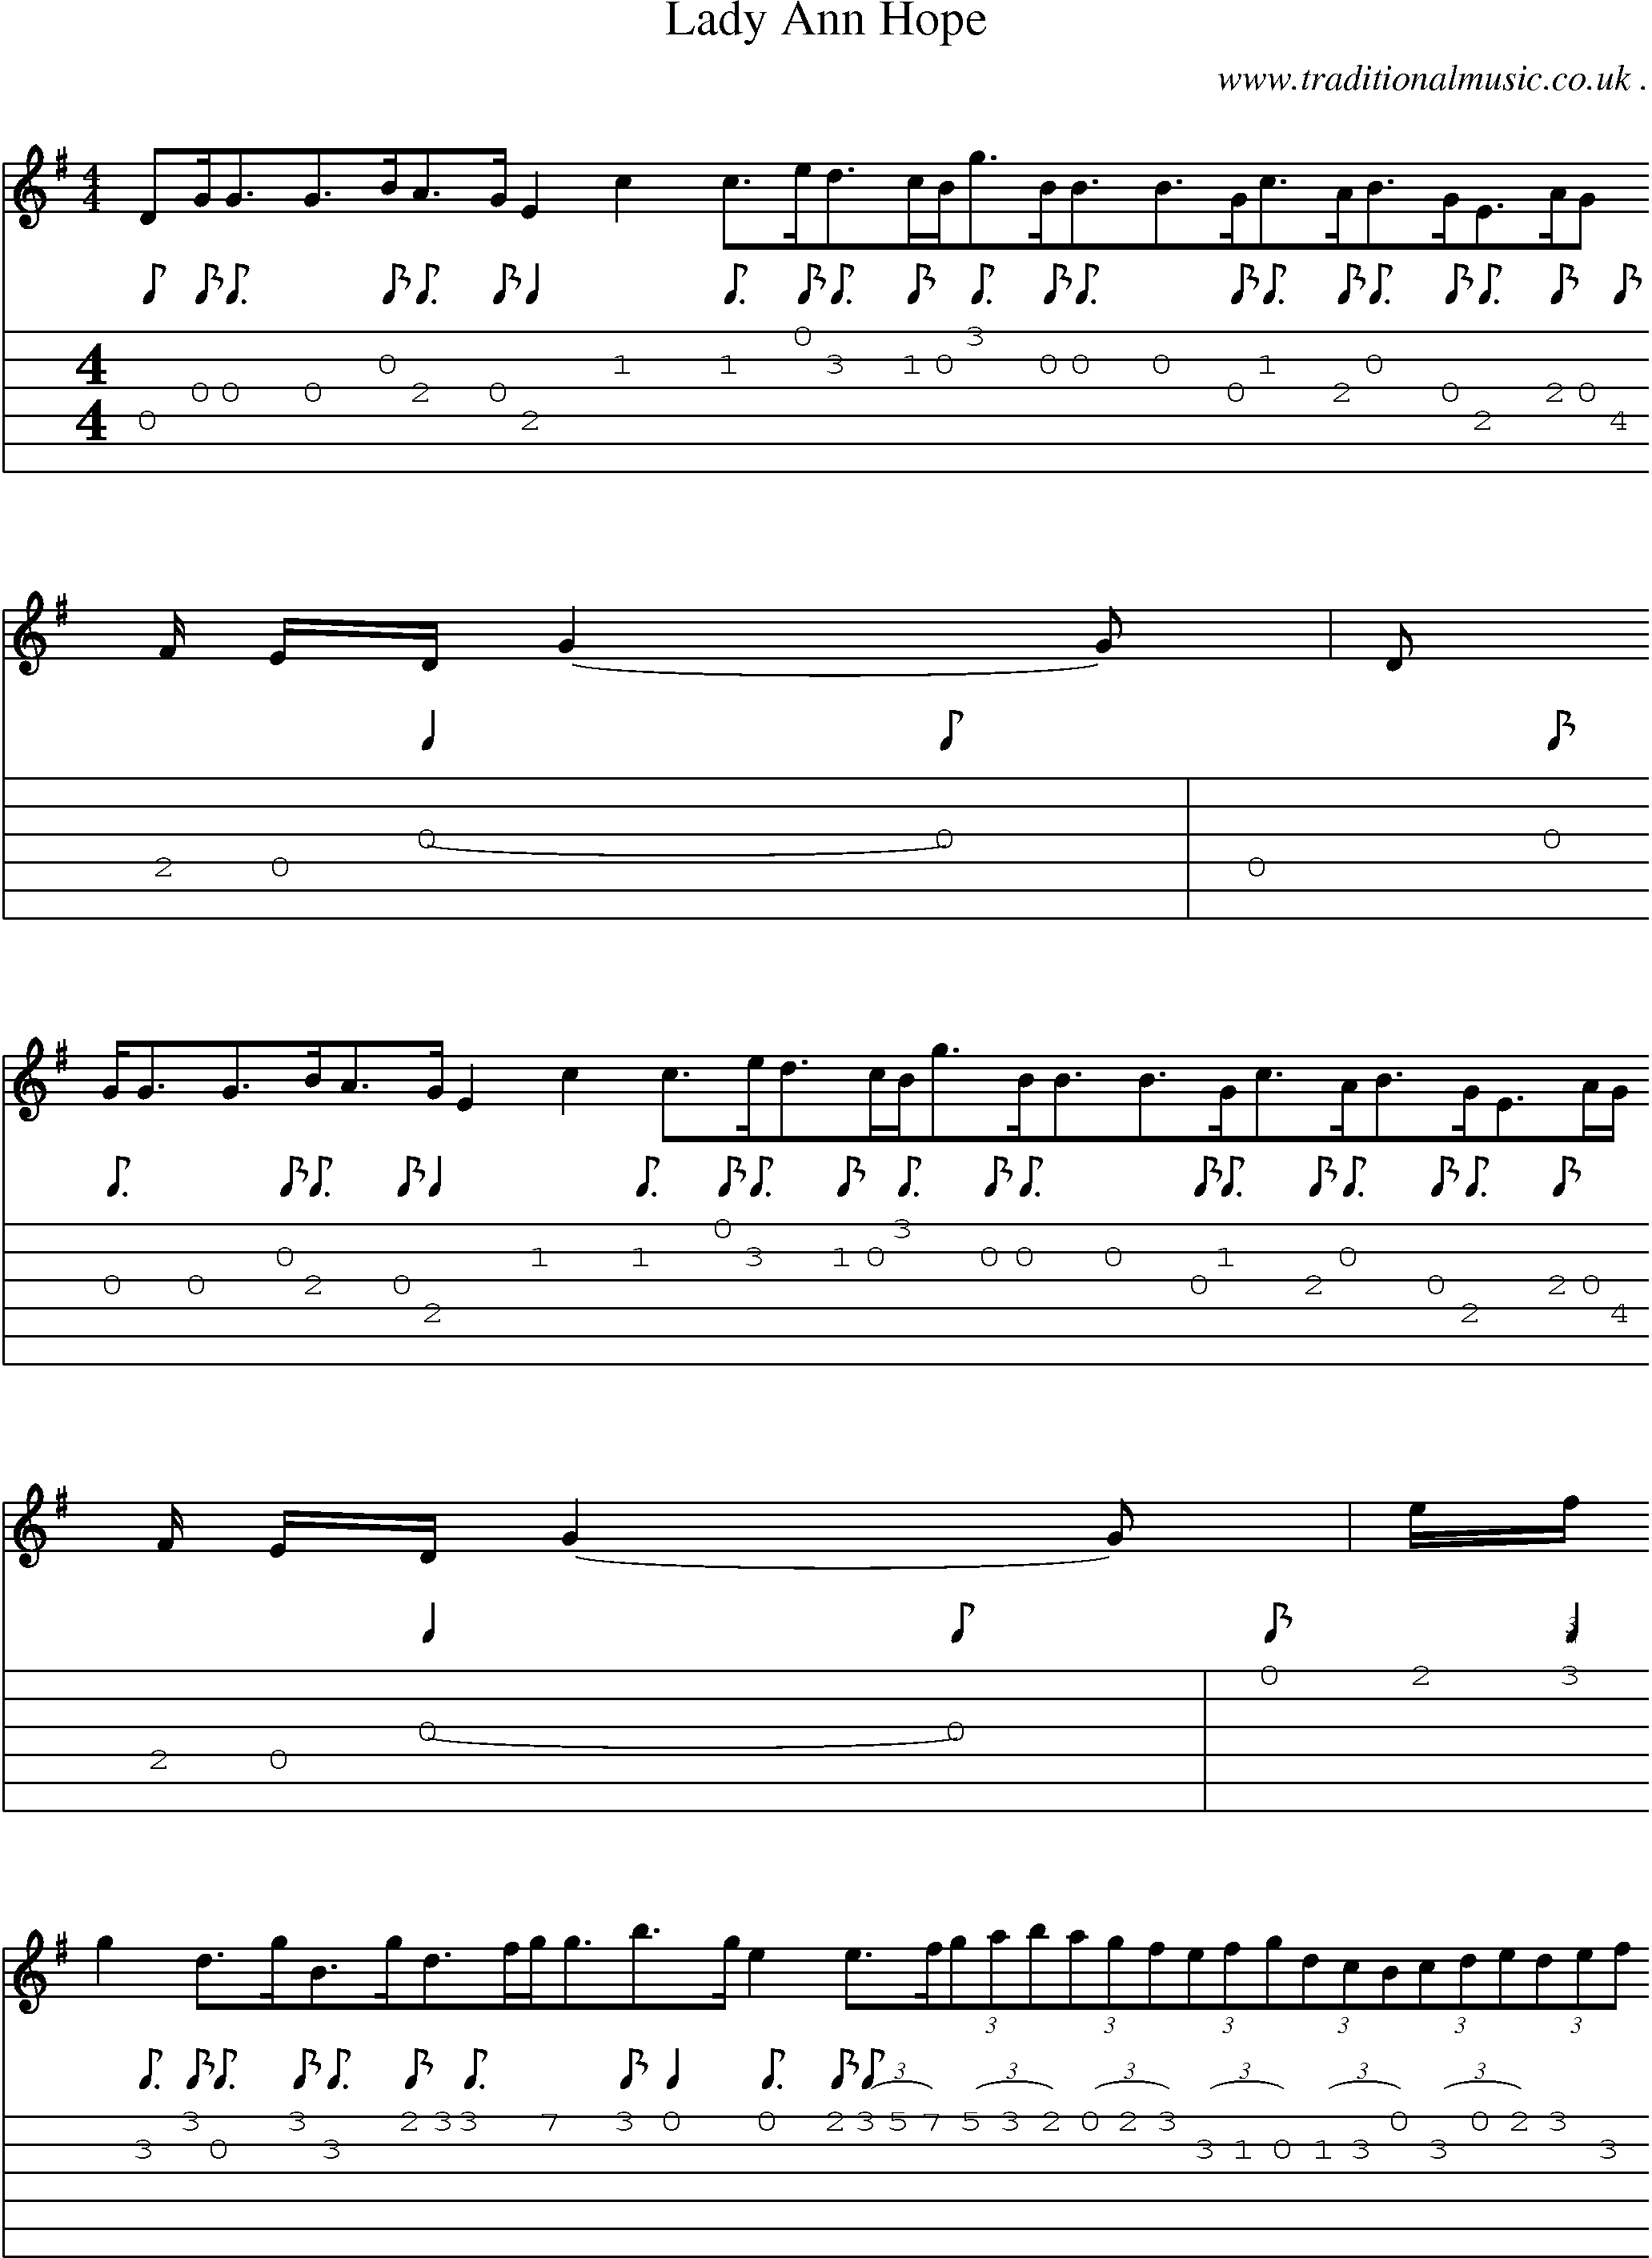 Sheet-Music and Guitar Tabs for Lady Ann Hope